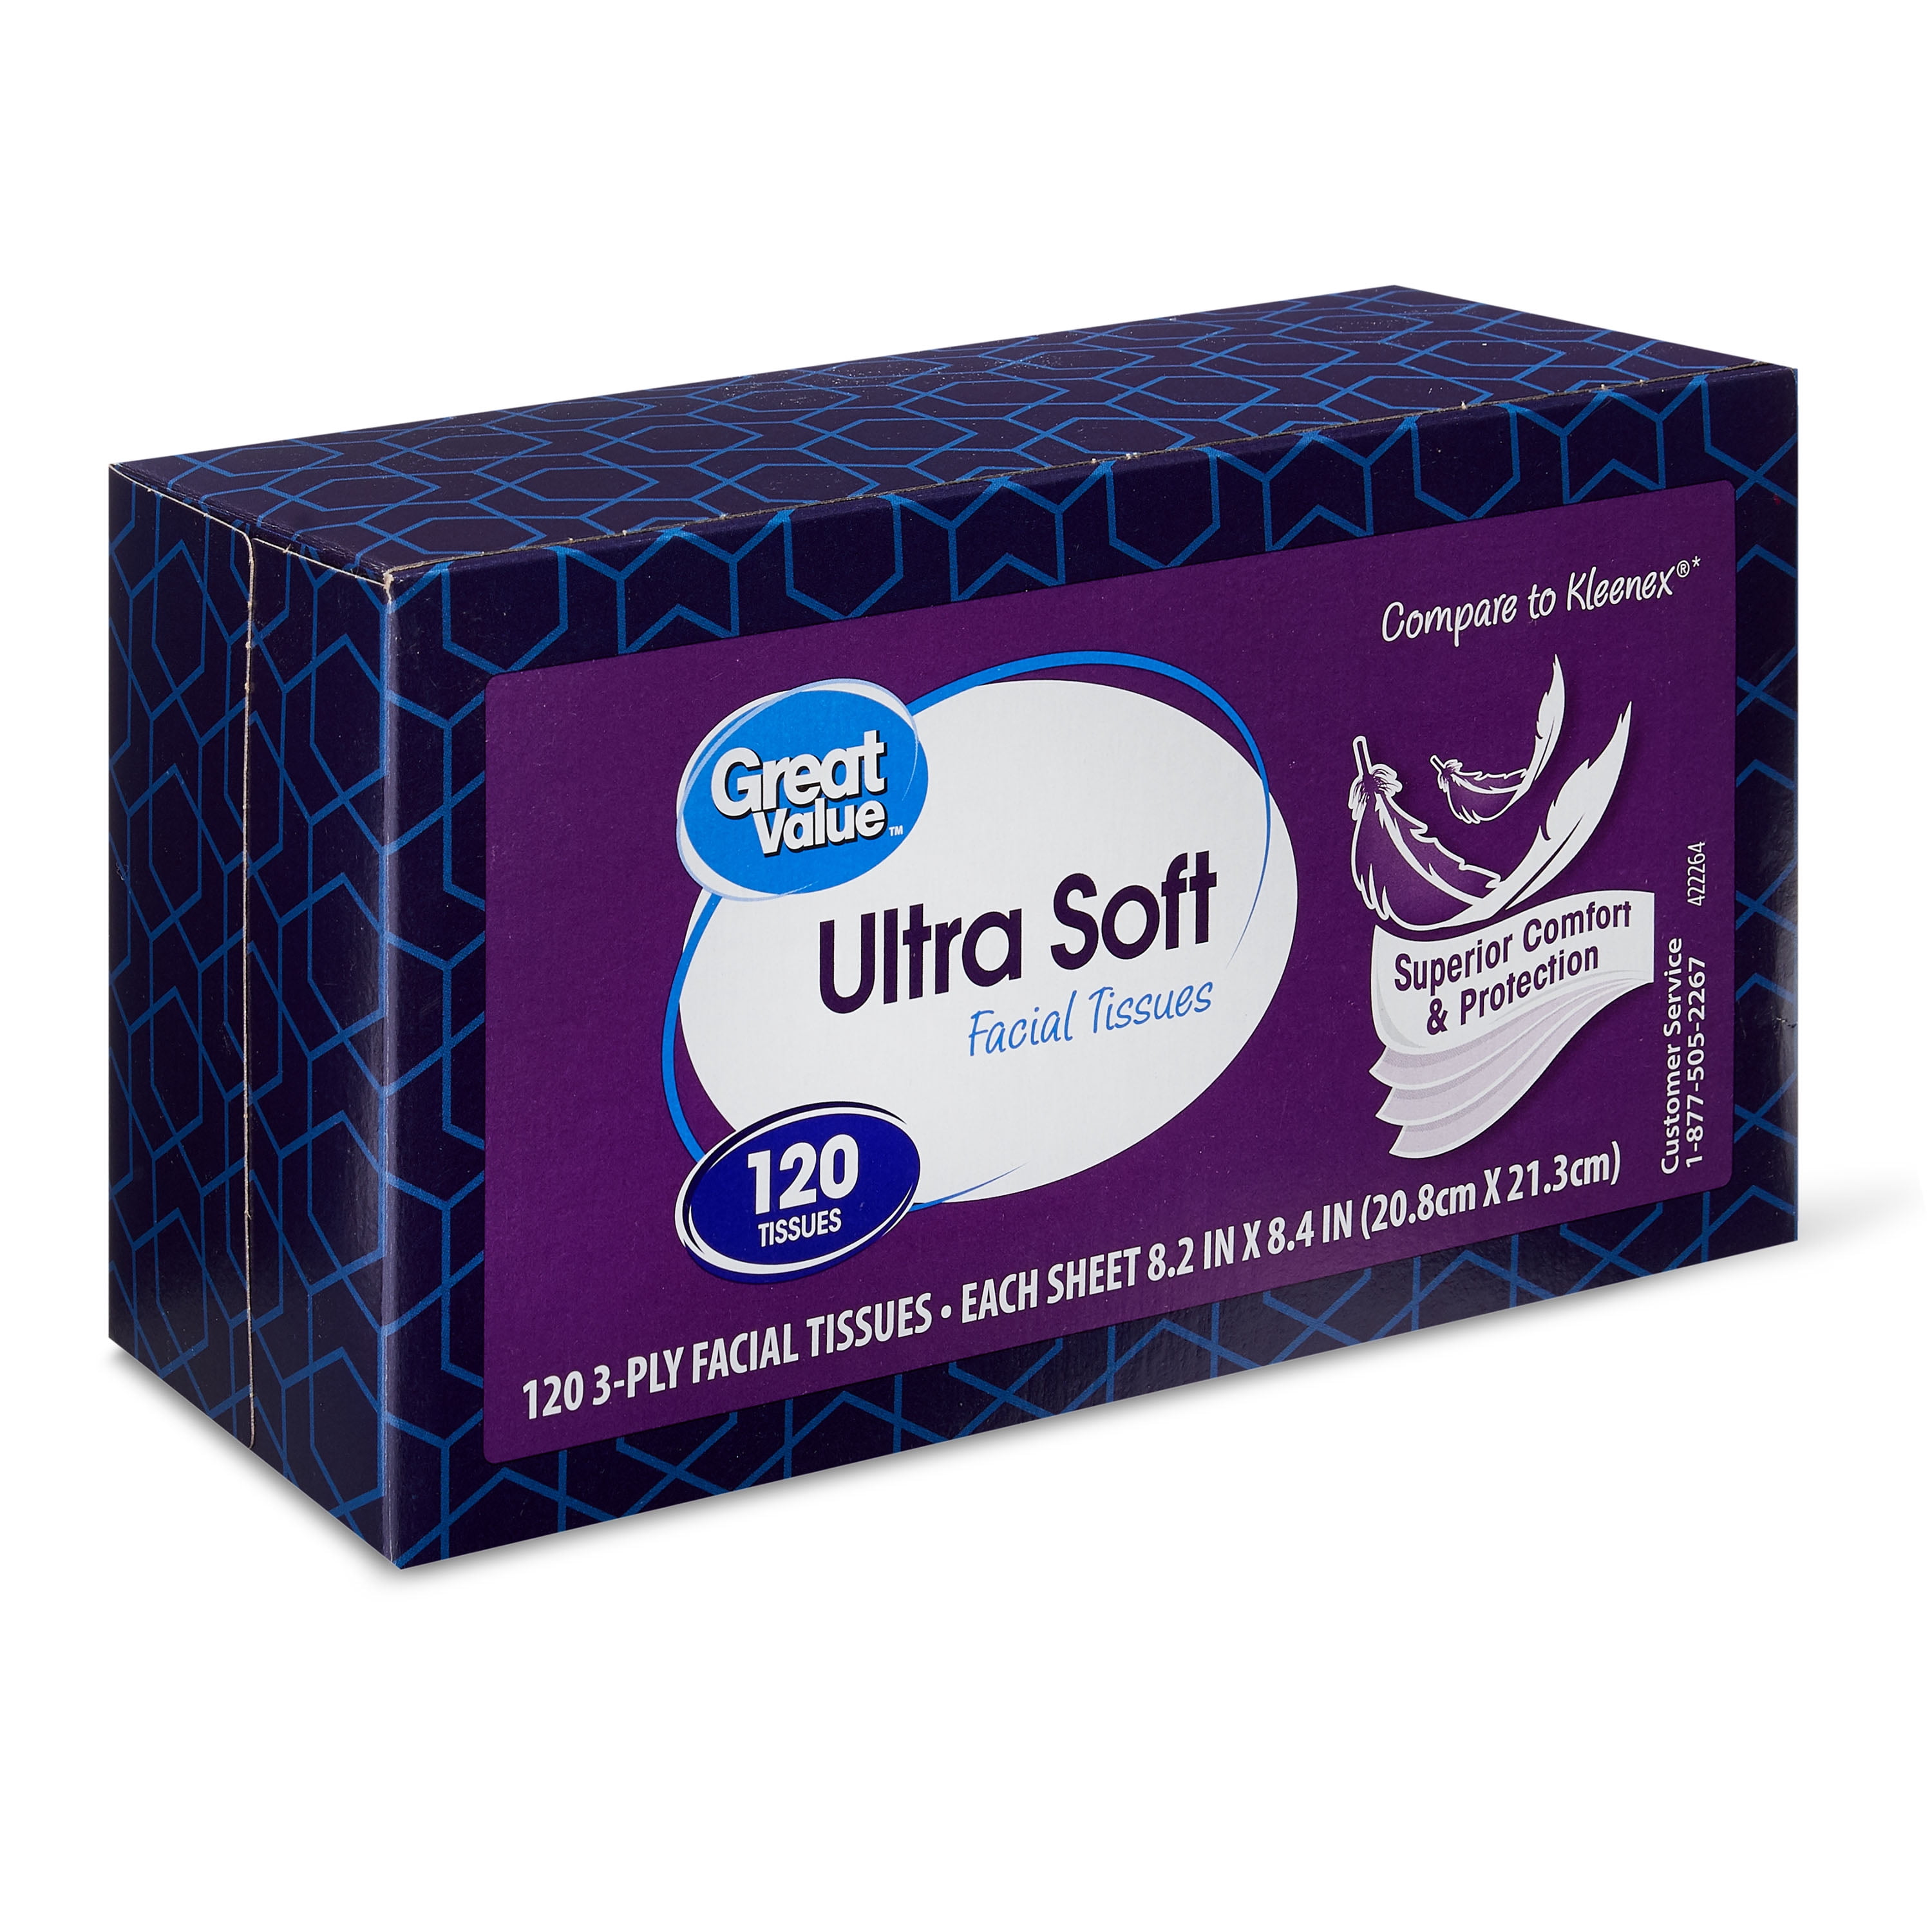 per box No Tax Free Shipping New 12 Pack 3-Ply Facial Tissue 960 tissues 80 ct 